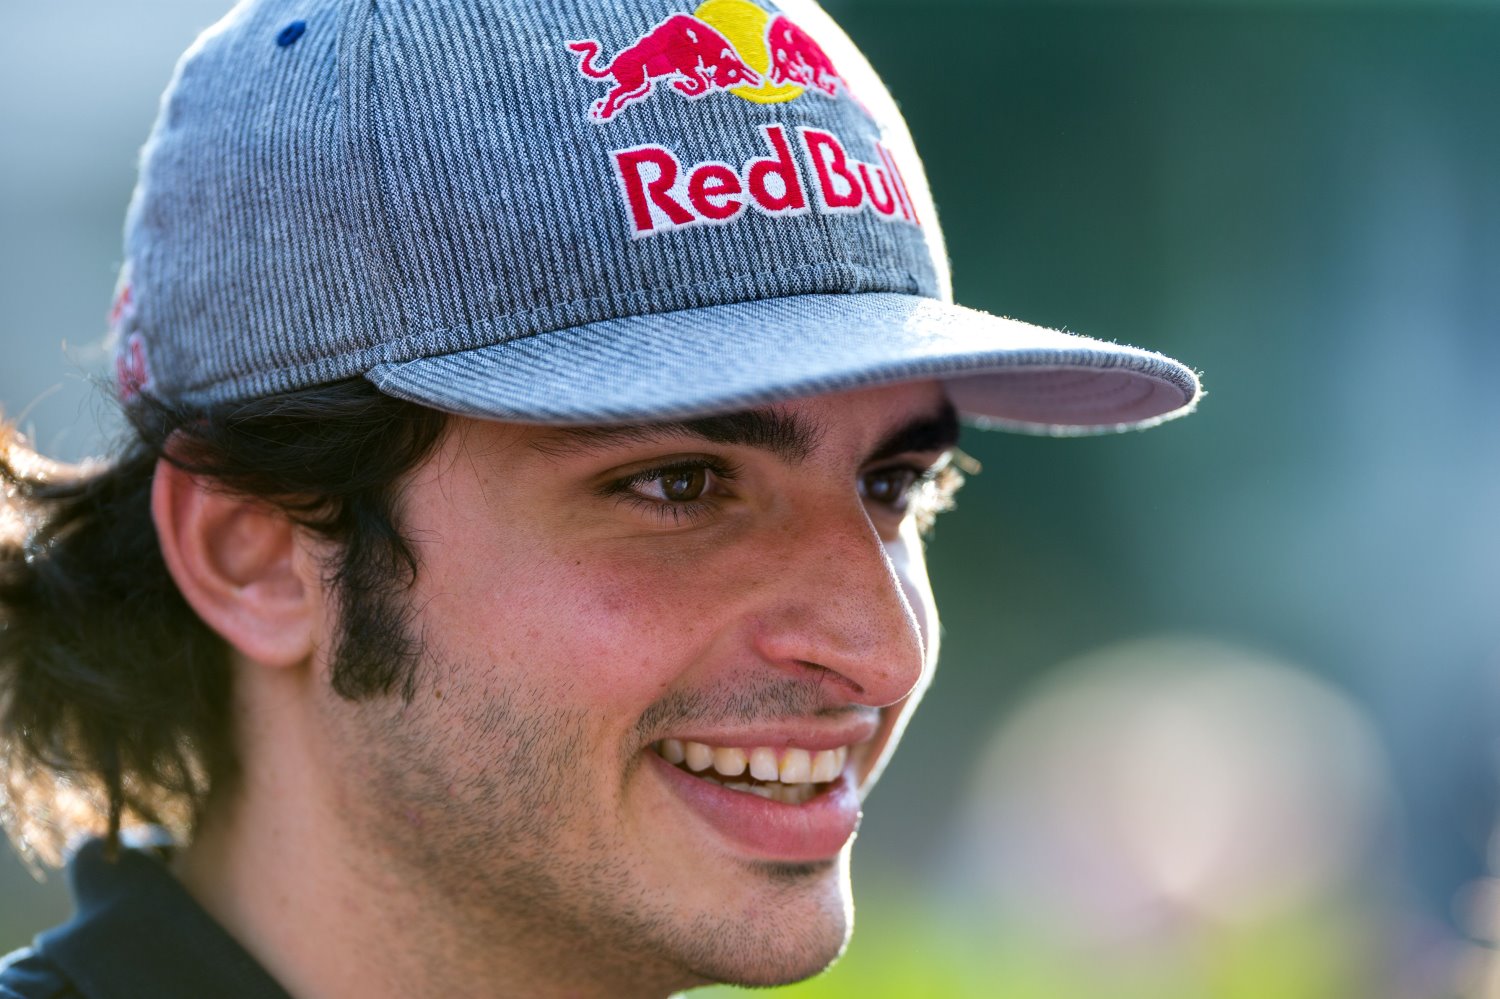 Sainz thinks Toro Rosso could beat its bigger Red Bull Sister